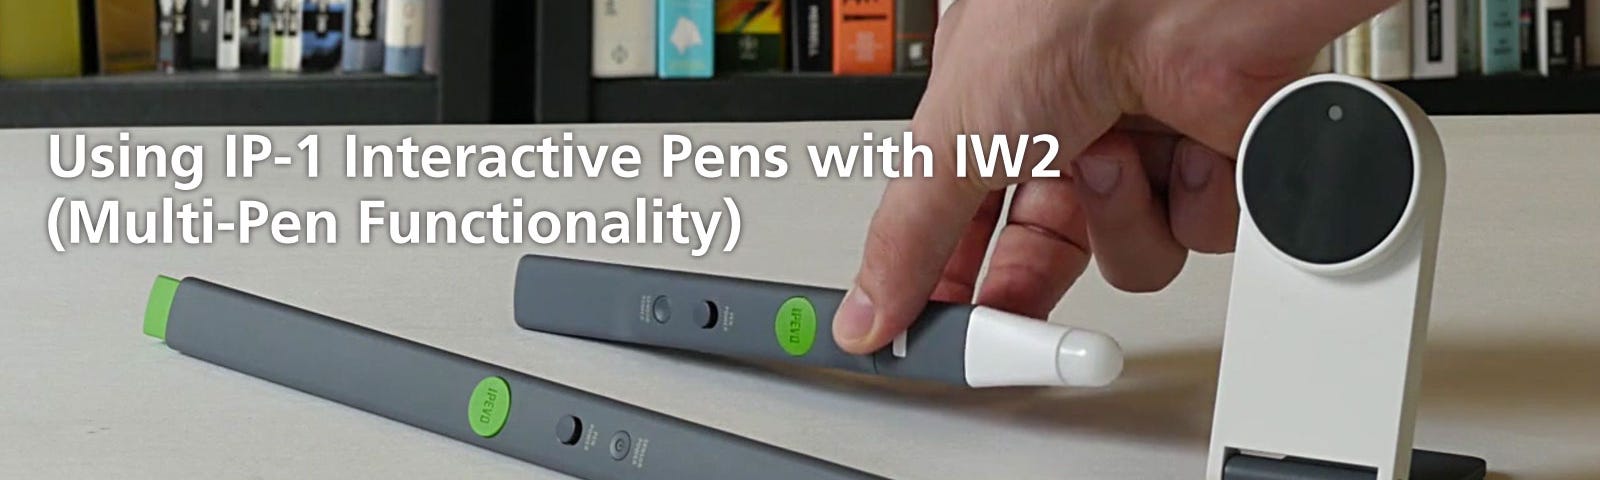 Using IP-1 Interactive Pens with IW2 (Multi-Pen Functionality)